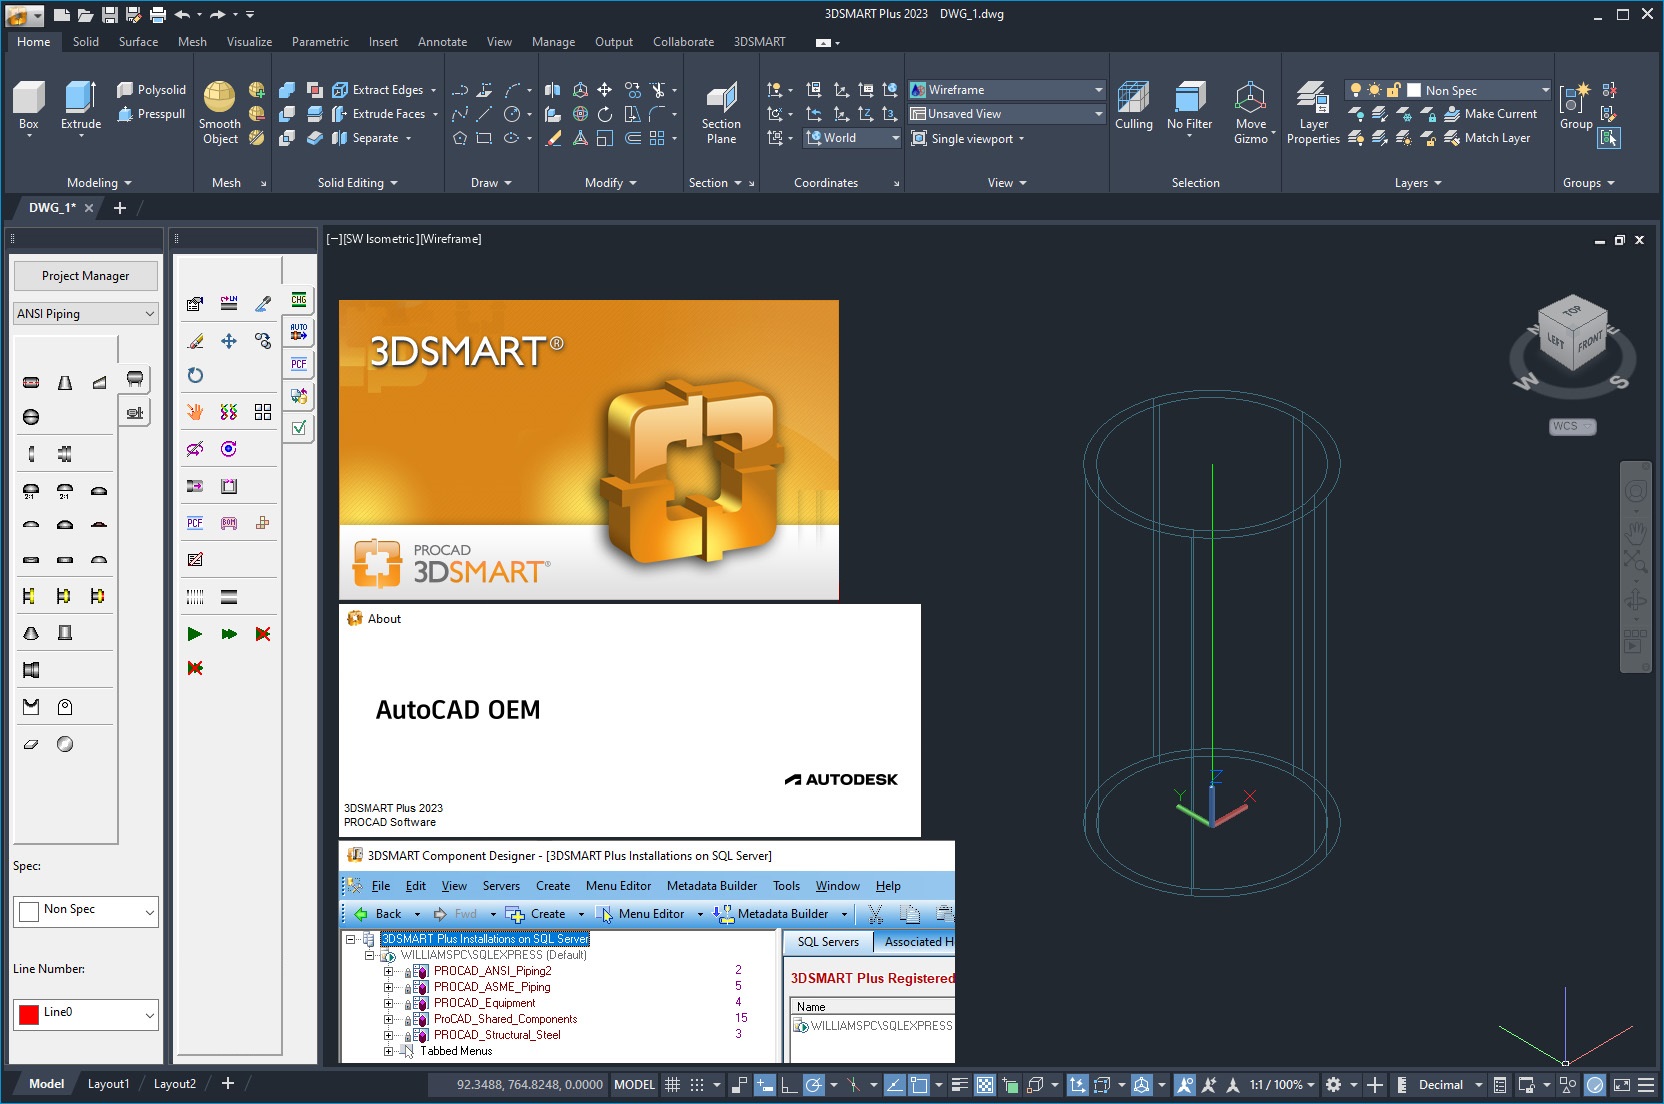 Working with PROCAD 3DSMART Plus 2023.0 full license